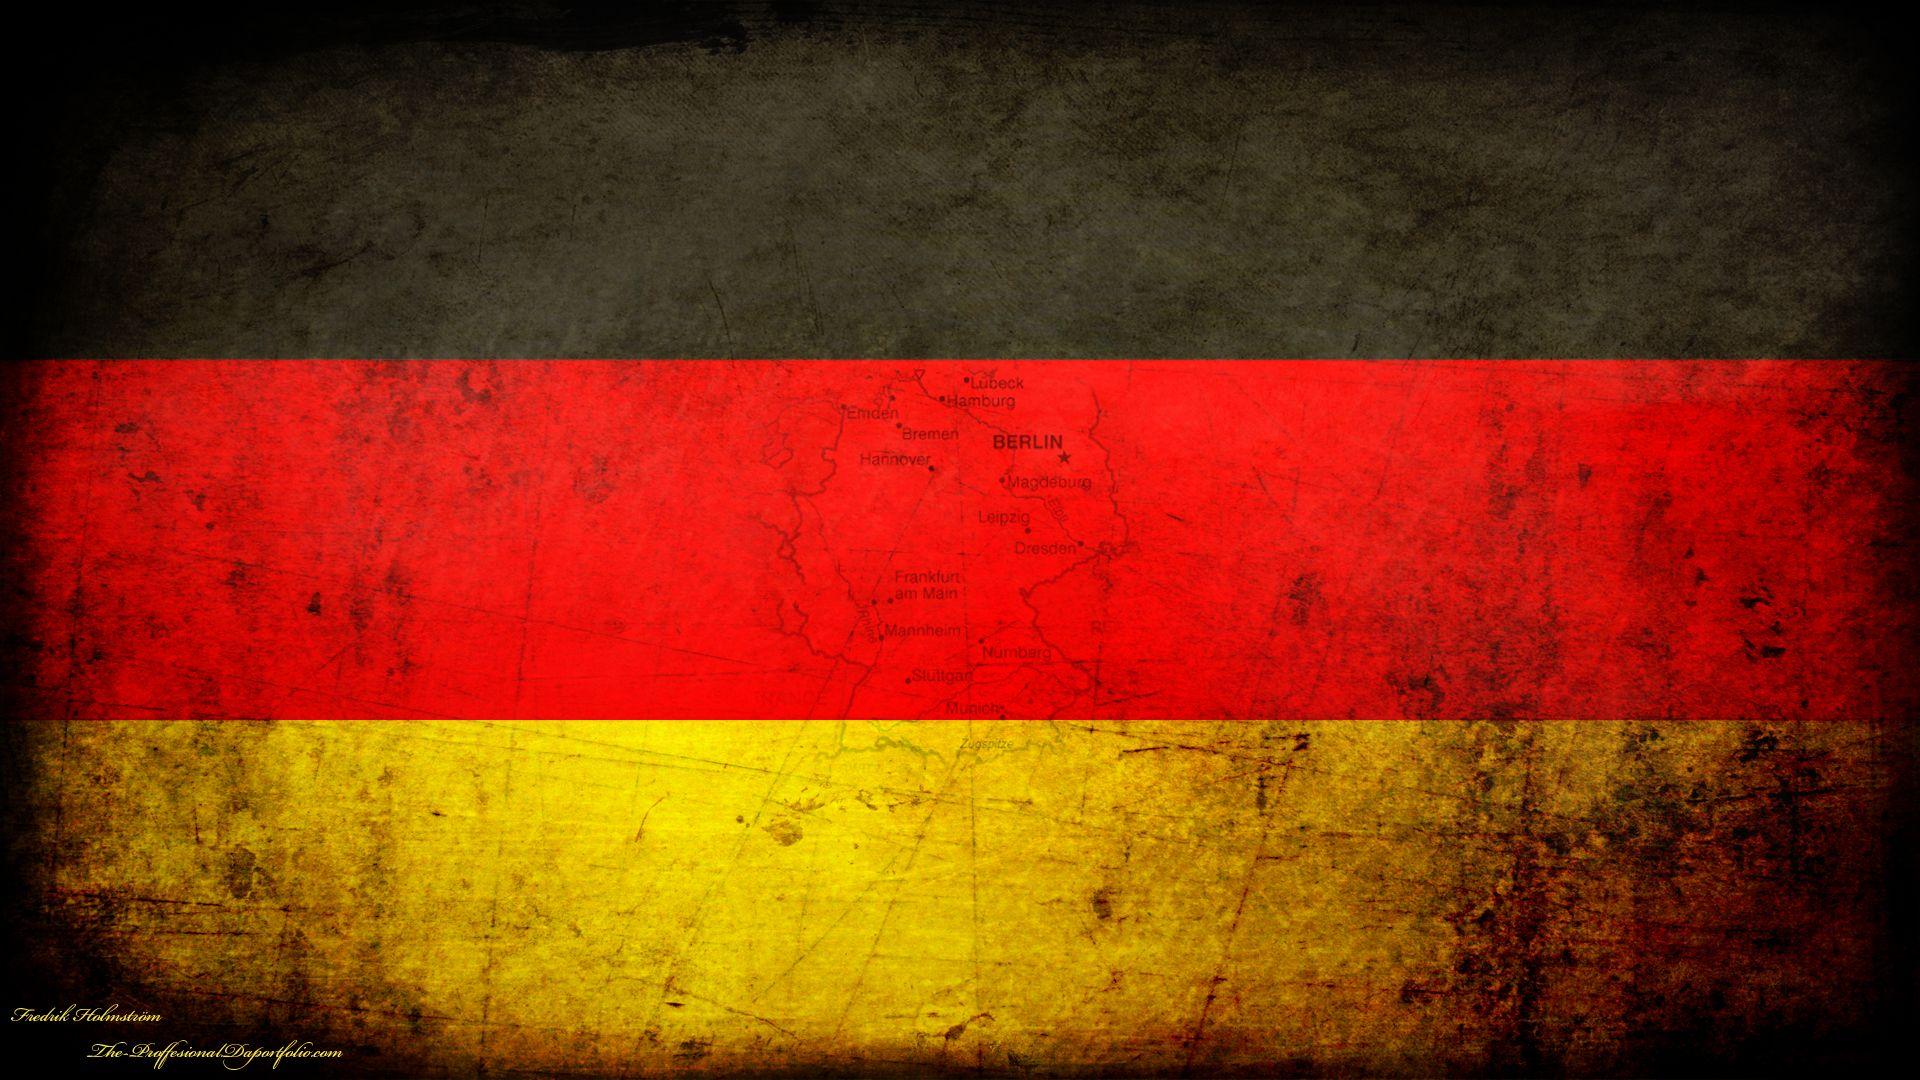 V.892: Awesome Germany Wallpaper, HD Image of Awesome Germany